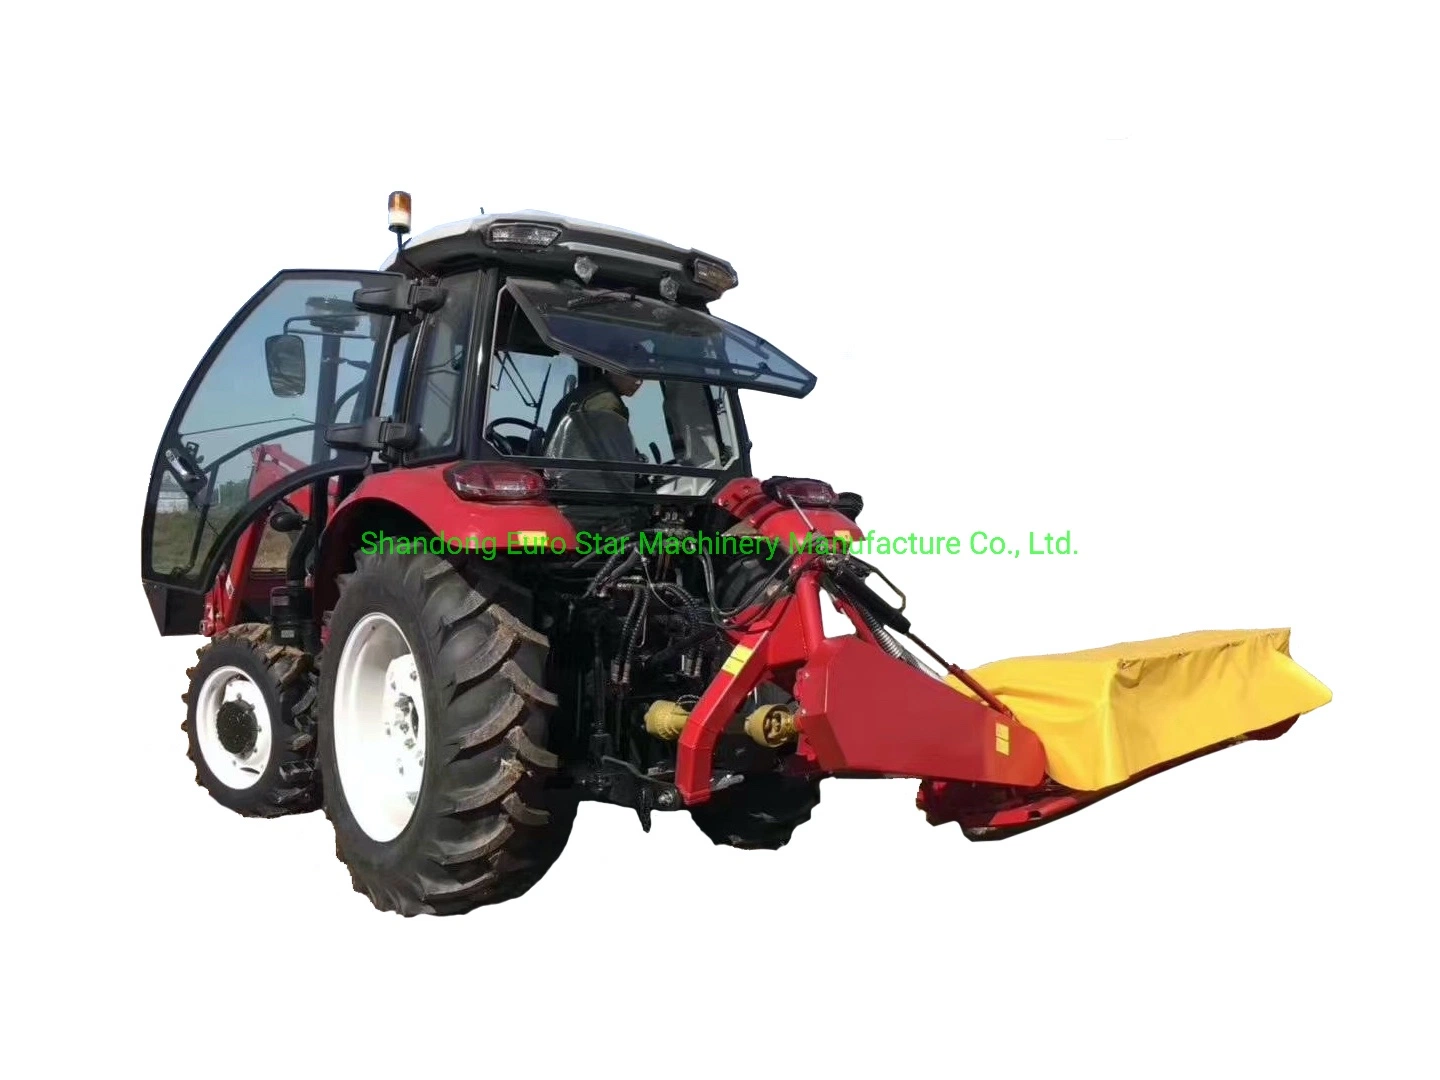 DRM1500 Disc Lawn Mower Sickle Hydraulic Alfalfa Hay Mower Rotary Garden Grass Machine Agricultural Machinery Trimmer Reciprocating Mower 30-60HP Tractor